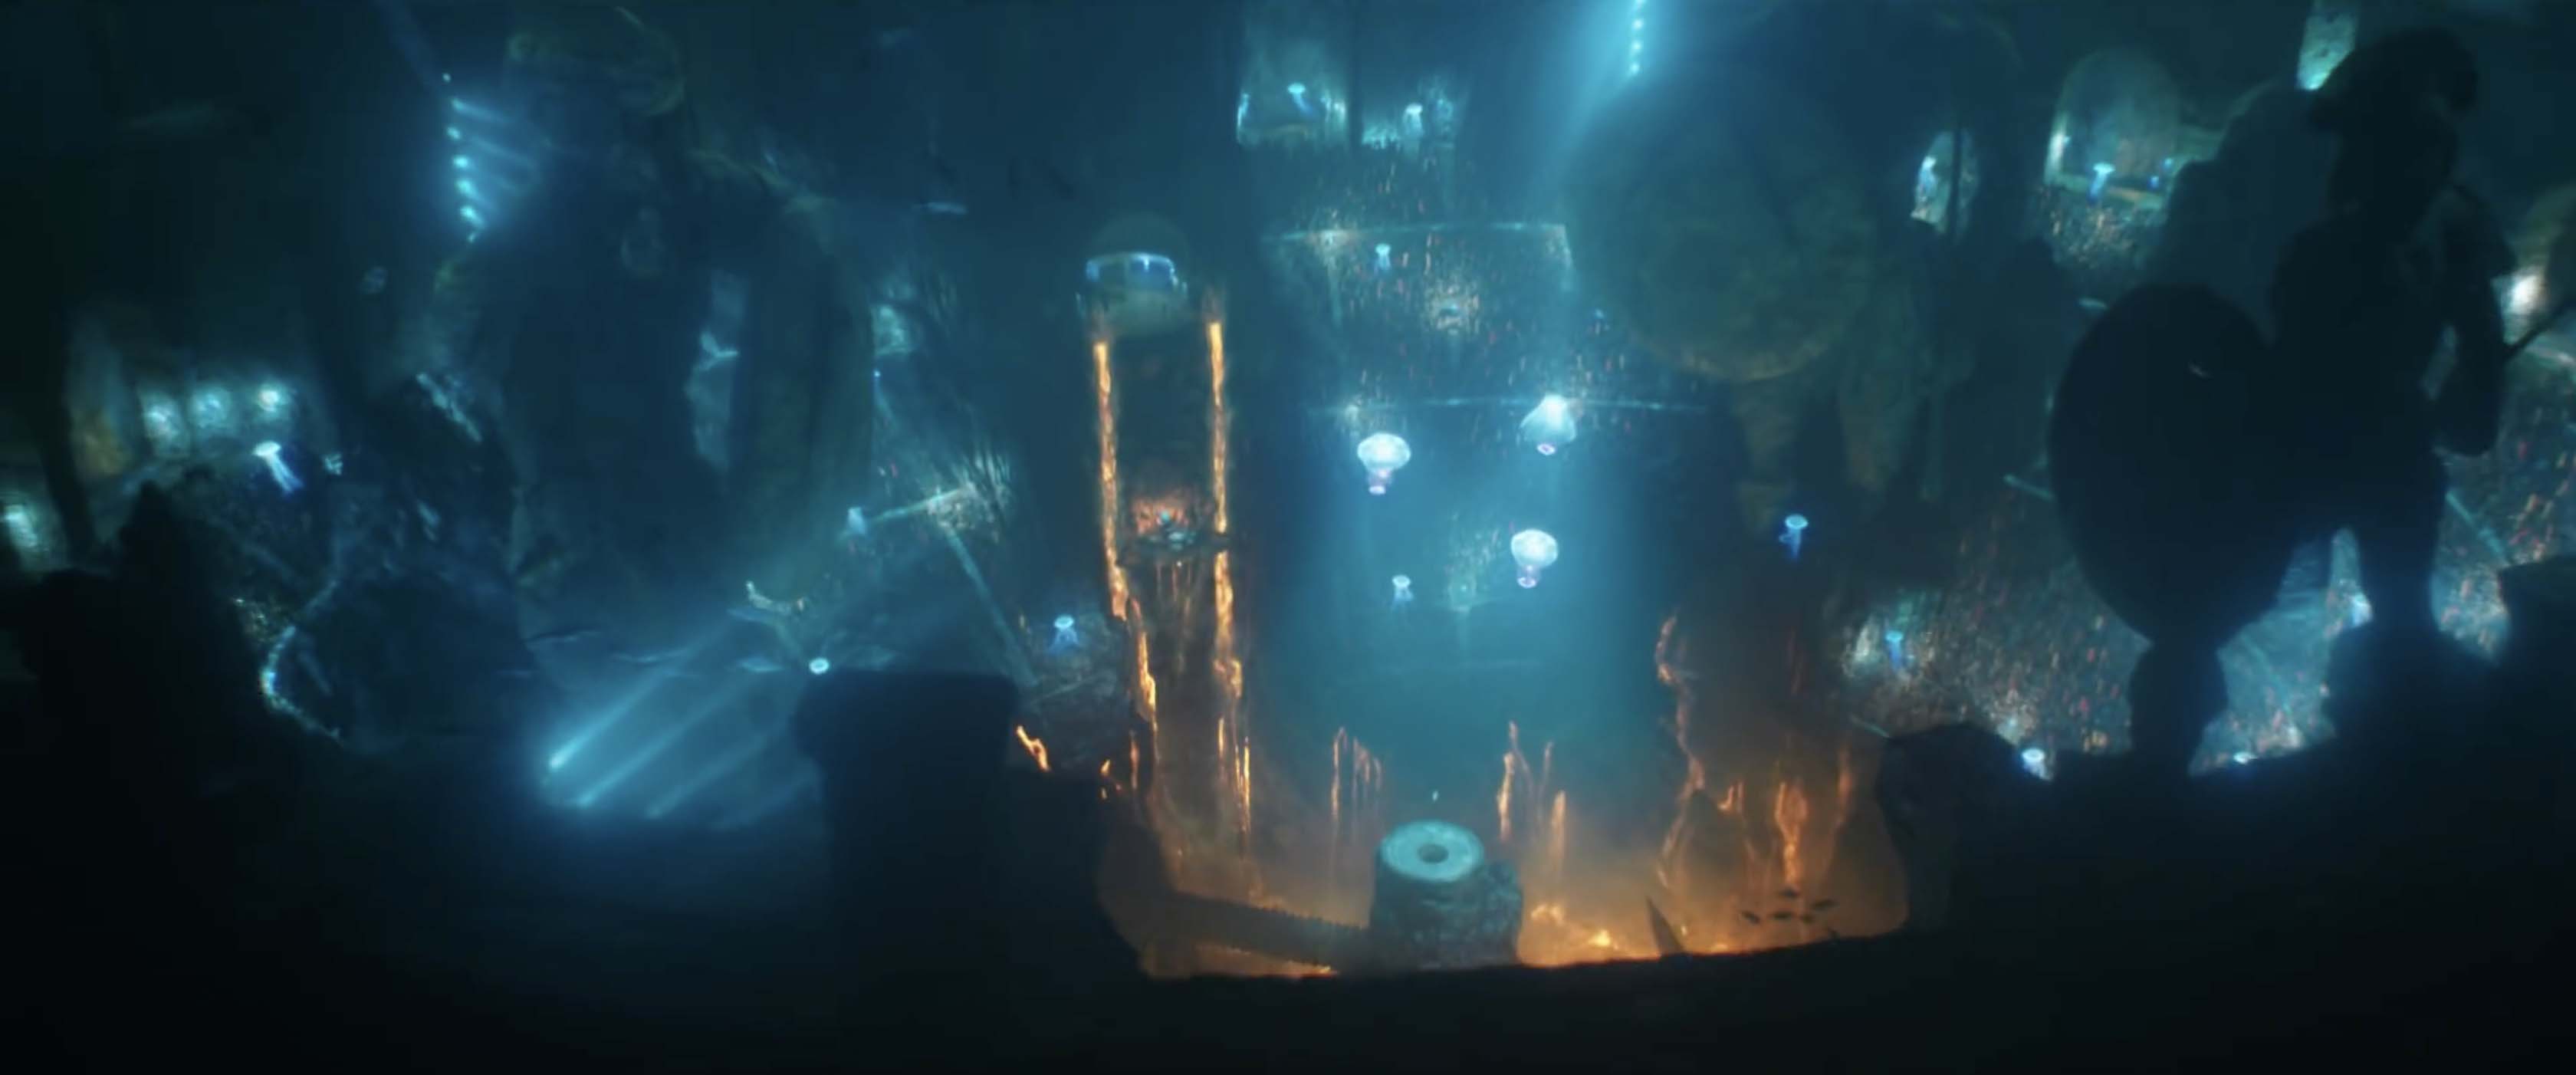 Aquaman Trailer - Our First Look at the King of the Seven Seas | The Nerdy3360 x 1402